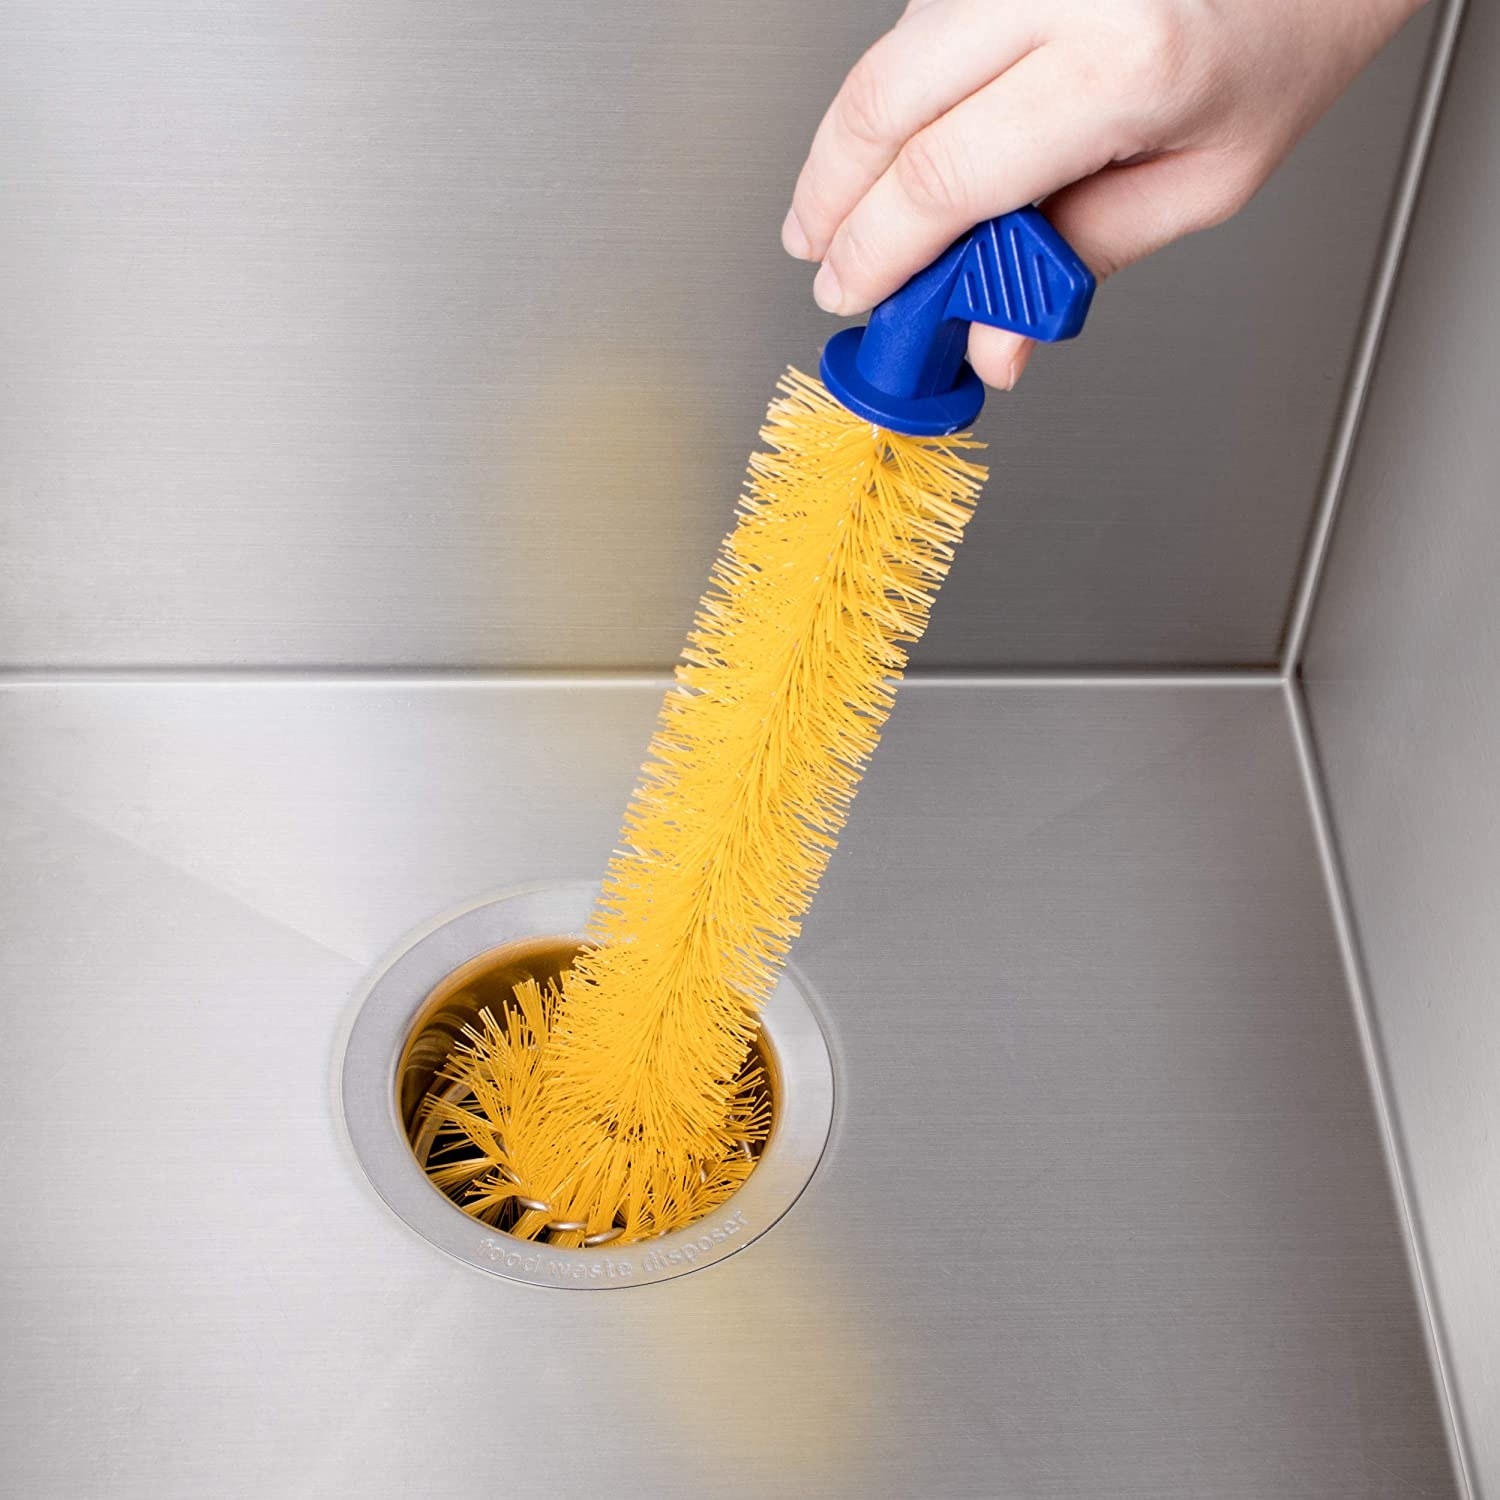 someone inserting the long garburator brush into a sink drain